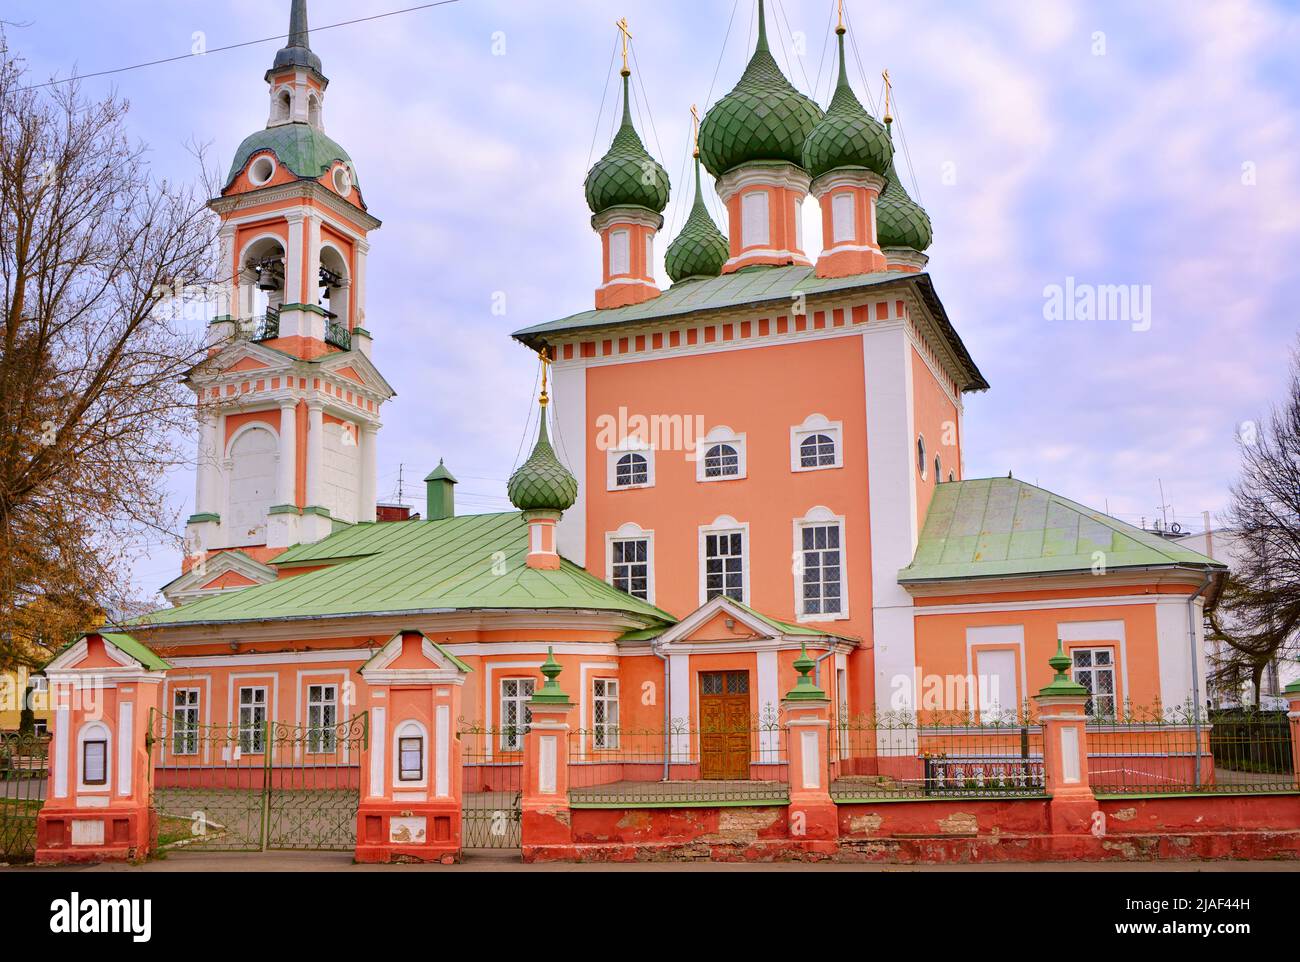 The Church of St. John Chrysostom. Orthodox church in Russian and classical architectural traditions XVIII century. Kostroma, Russia, 2022 Stock Photo